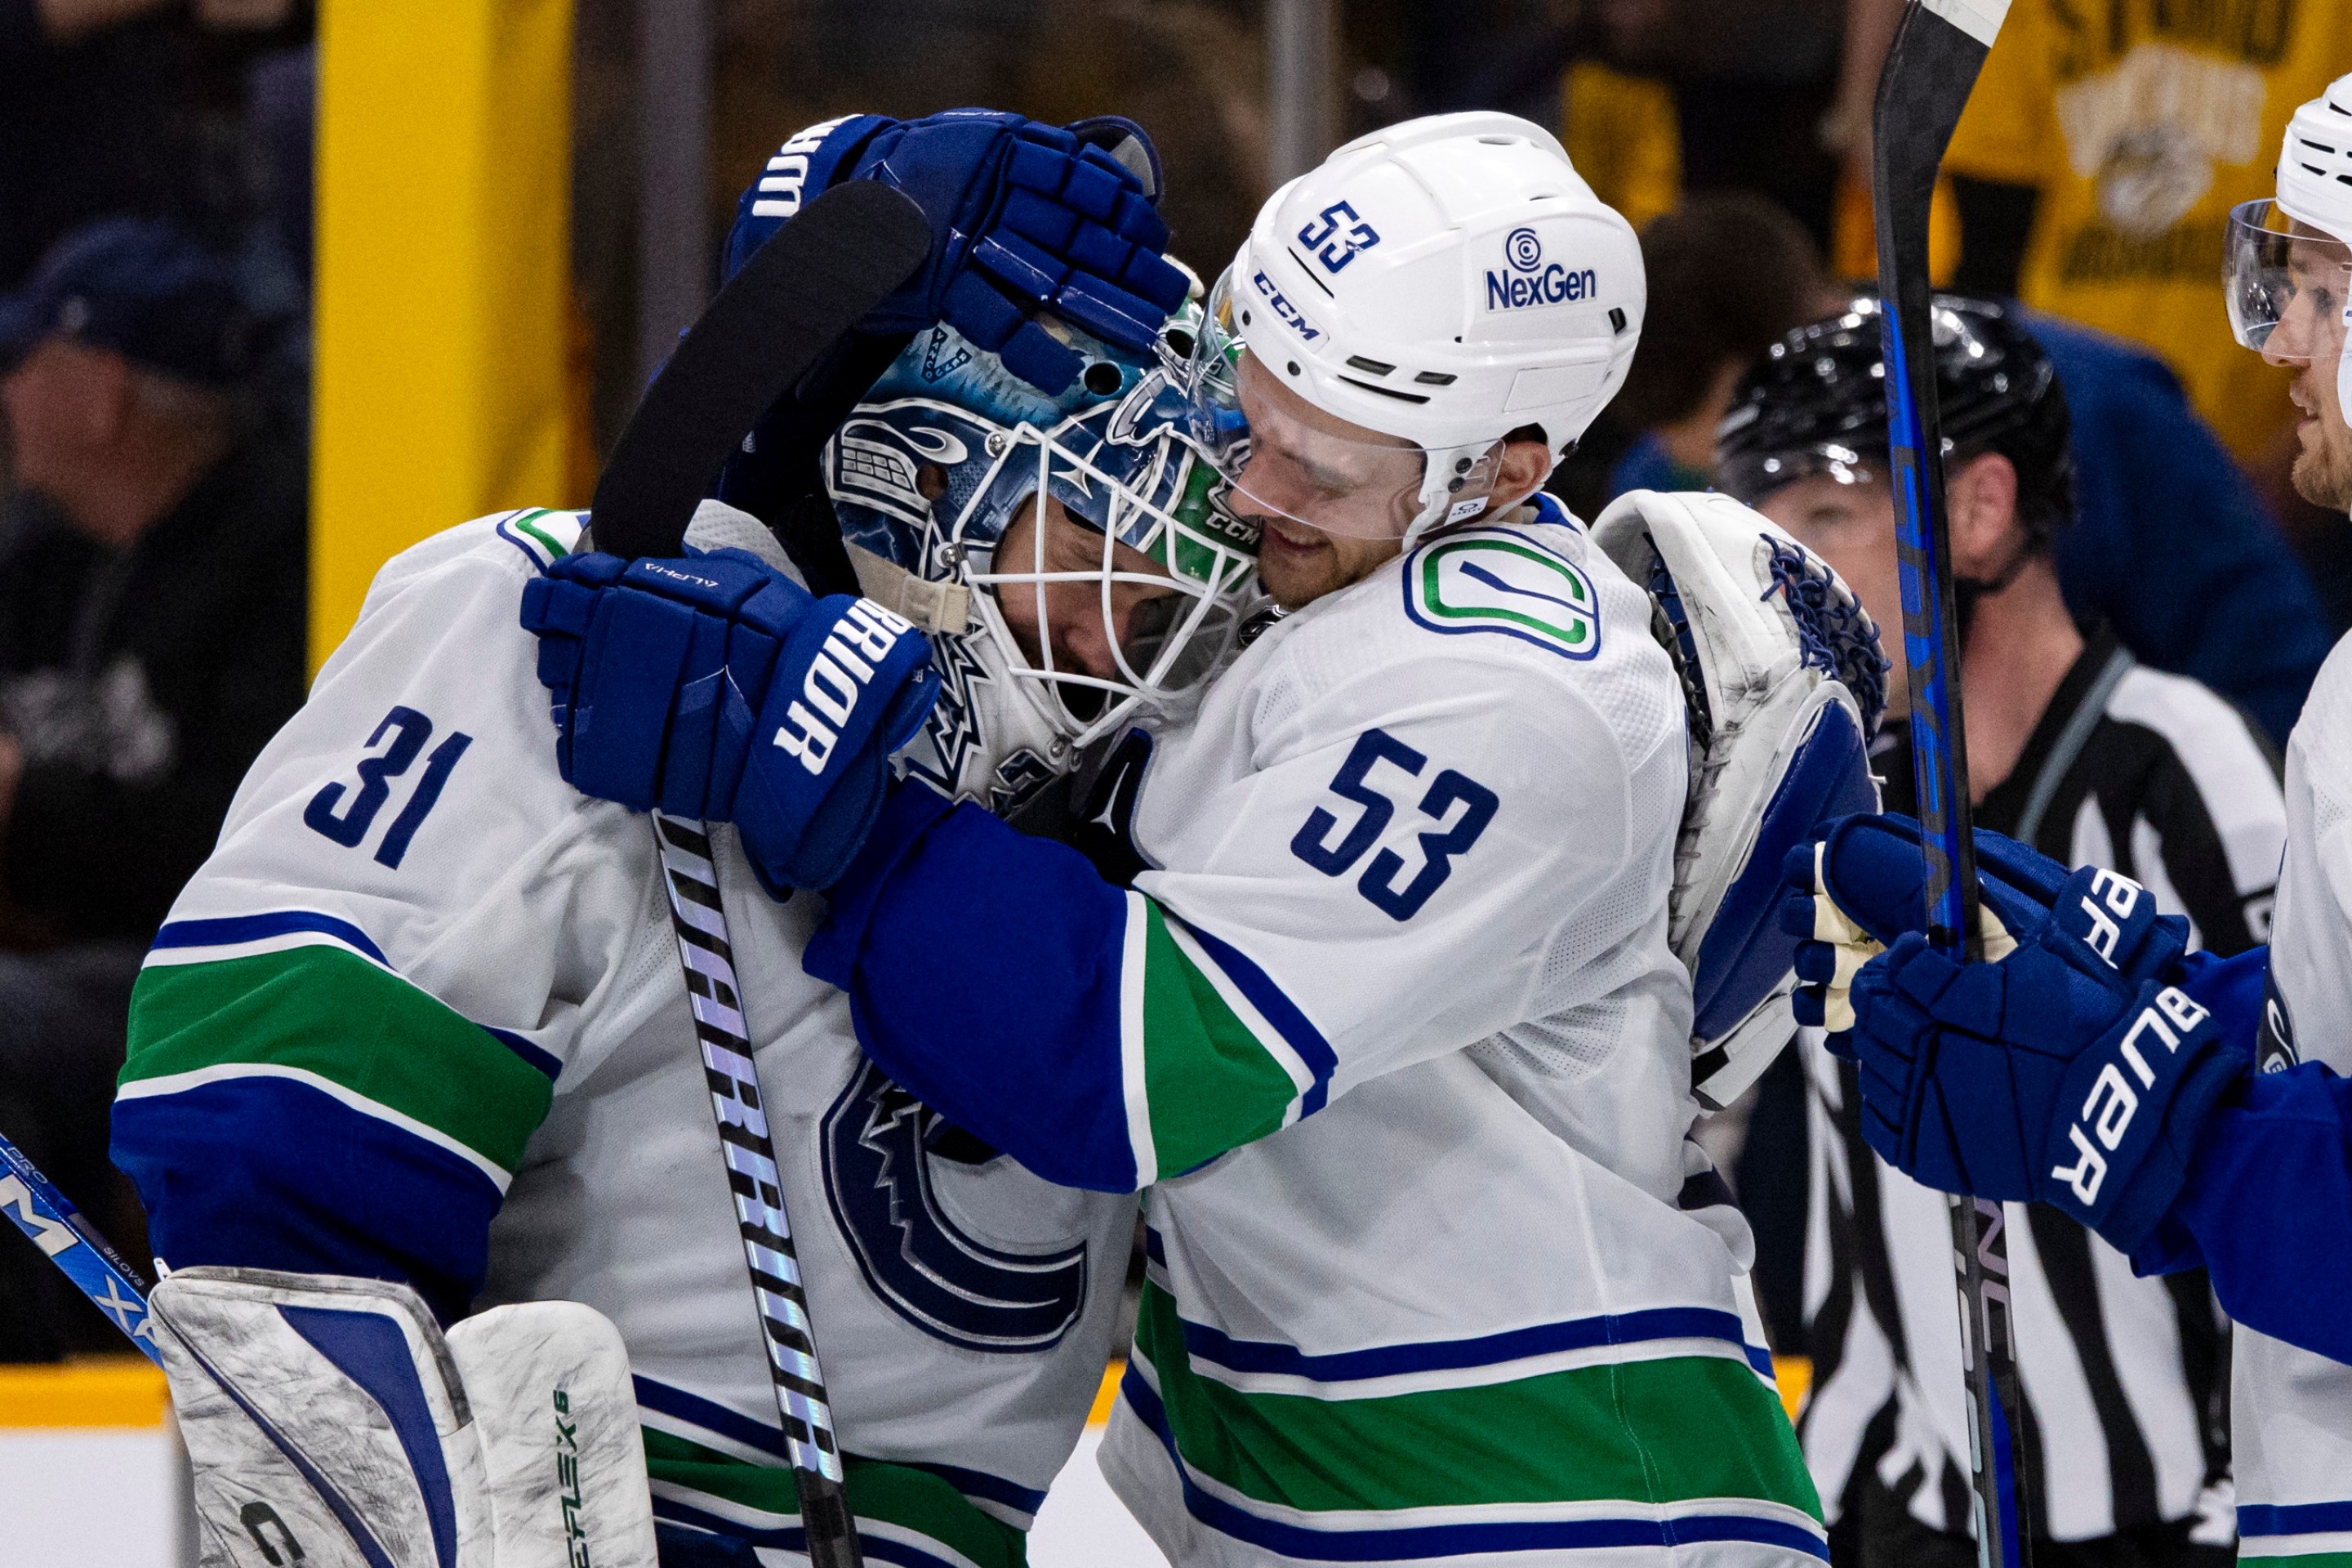 NASHVILLE, TENNESSEE - APRIL 28: Arturs Silovs #31 and Teddy Blueger #53 of the Vancouver Canucks celebrate after defeating the Nashville Predators during overtime of Game Four of the First Round of the 2024 Stanley Cup Playoffs at Bridgestone Arena on April 28, 2024 in Nashville, Tennessee. (Photo by Brett Carlsen/Getty Images) *** Local Caption *** Arturs Silovs; Teddy Blueger